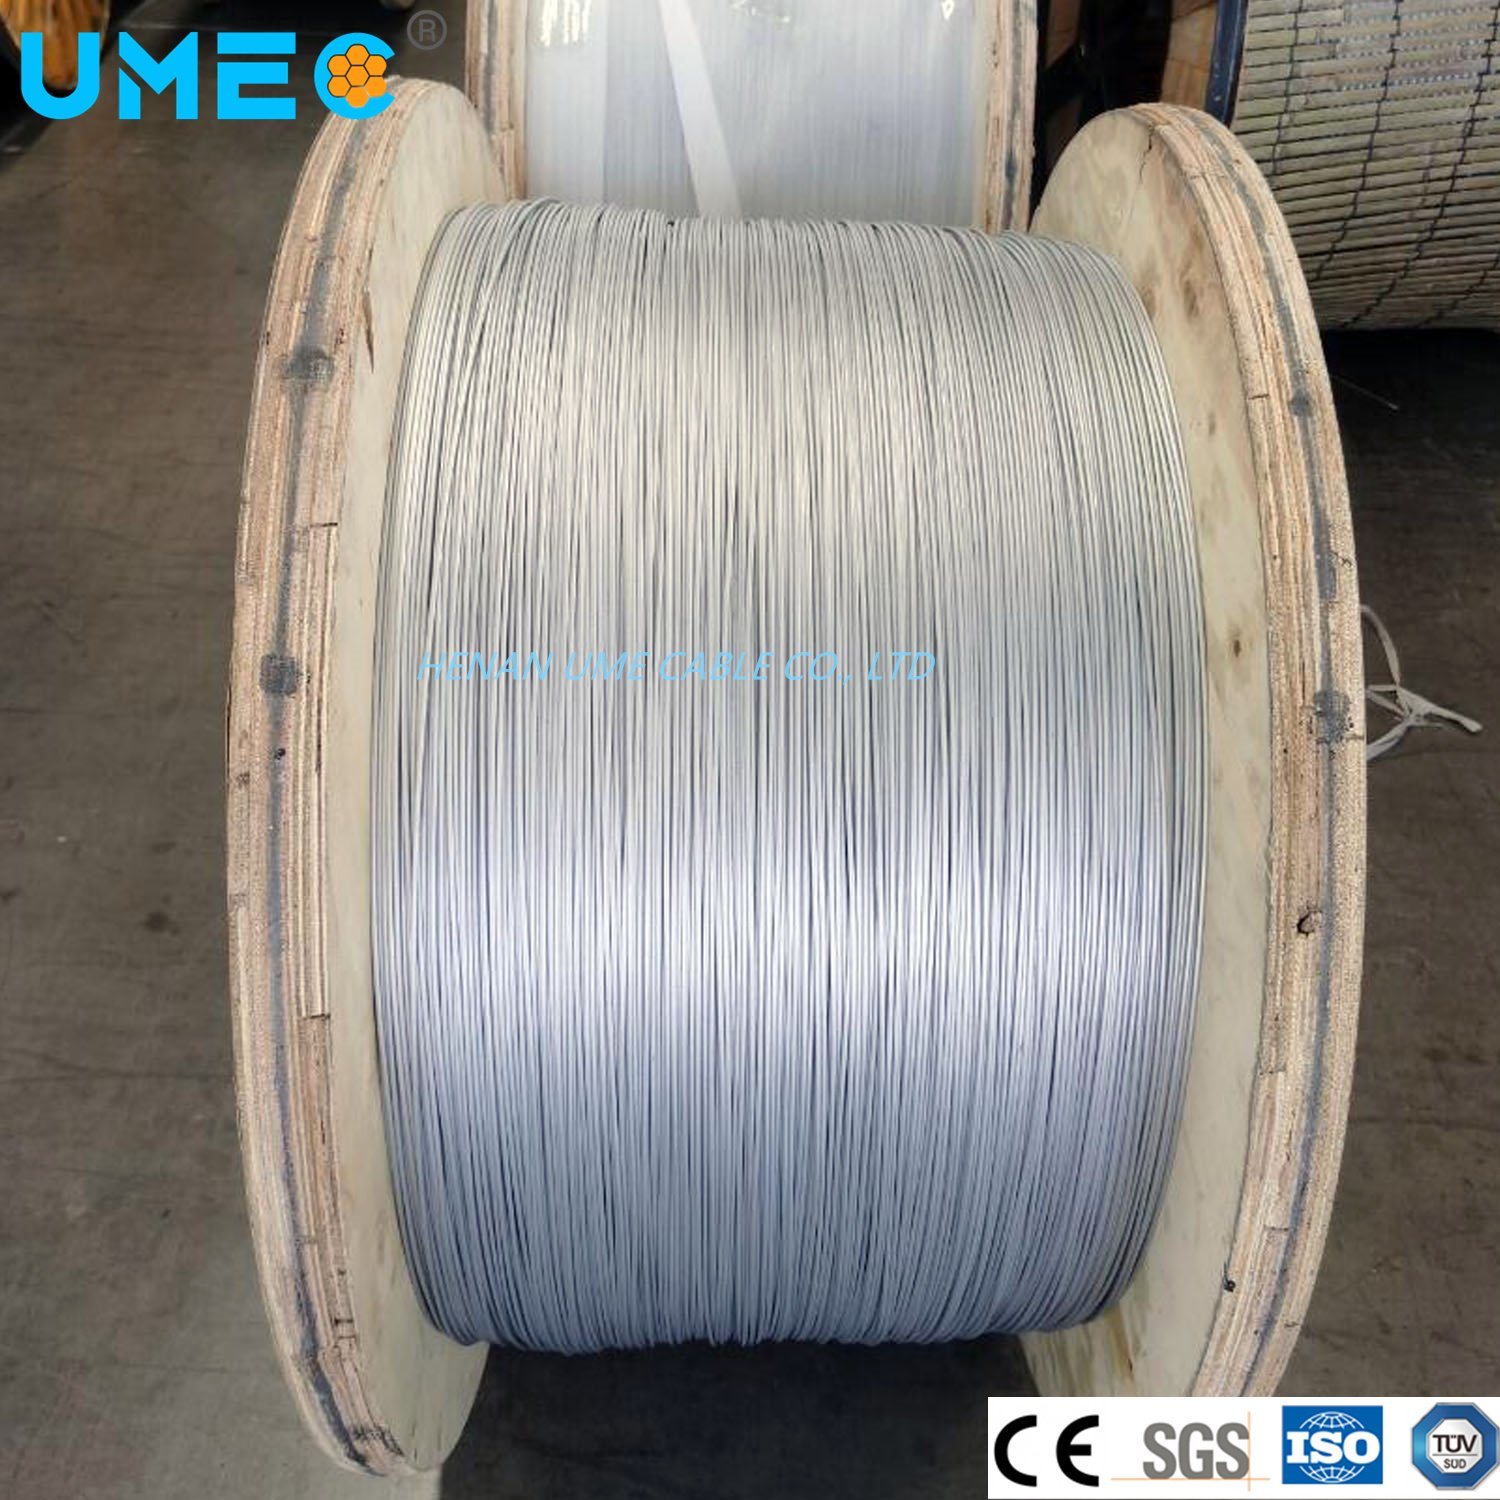 Electric Bare Overhead Ground Wire Acs Used for ACSR/Aw Opgw Overhead Ground Conductor 20%Iacs 40%Iacs Conductor